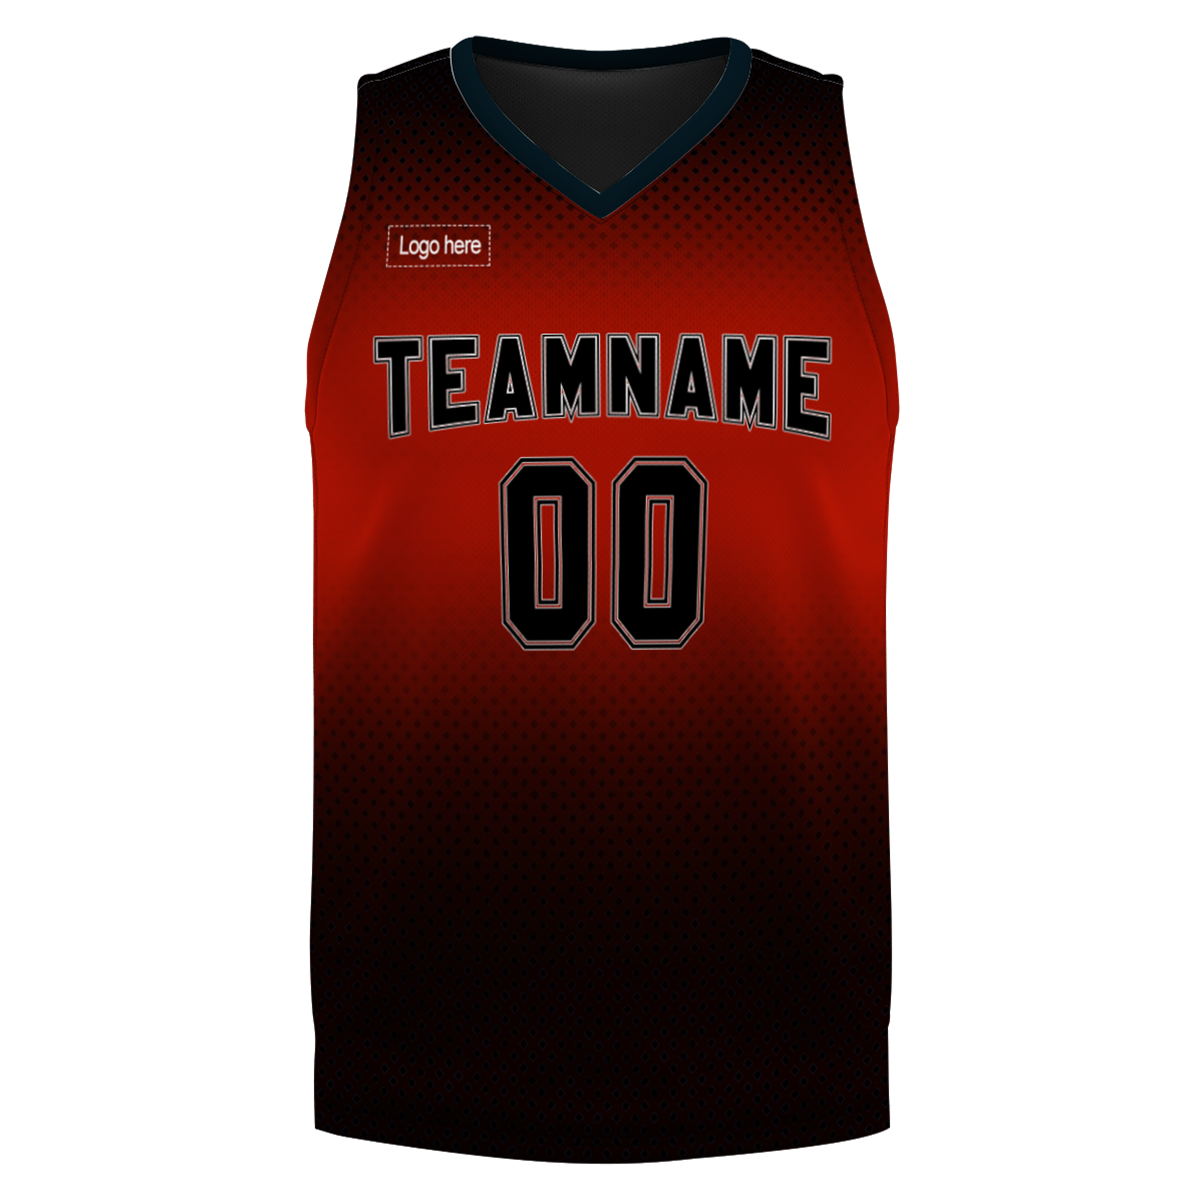 customize-basketball-team-wear-suits-print-on-demand-sublimation-breathable-basketball-jersey-uniforms-at-cj-pod-4